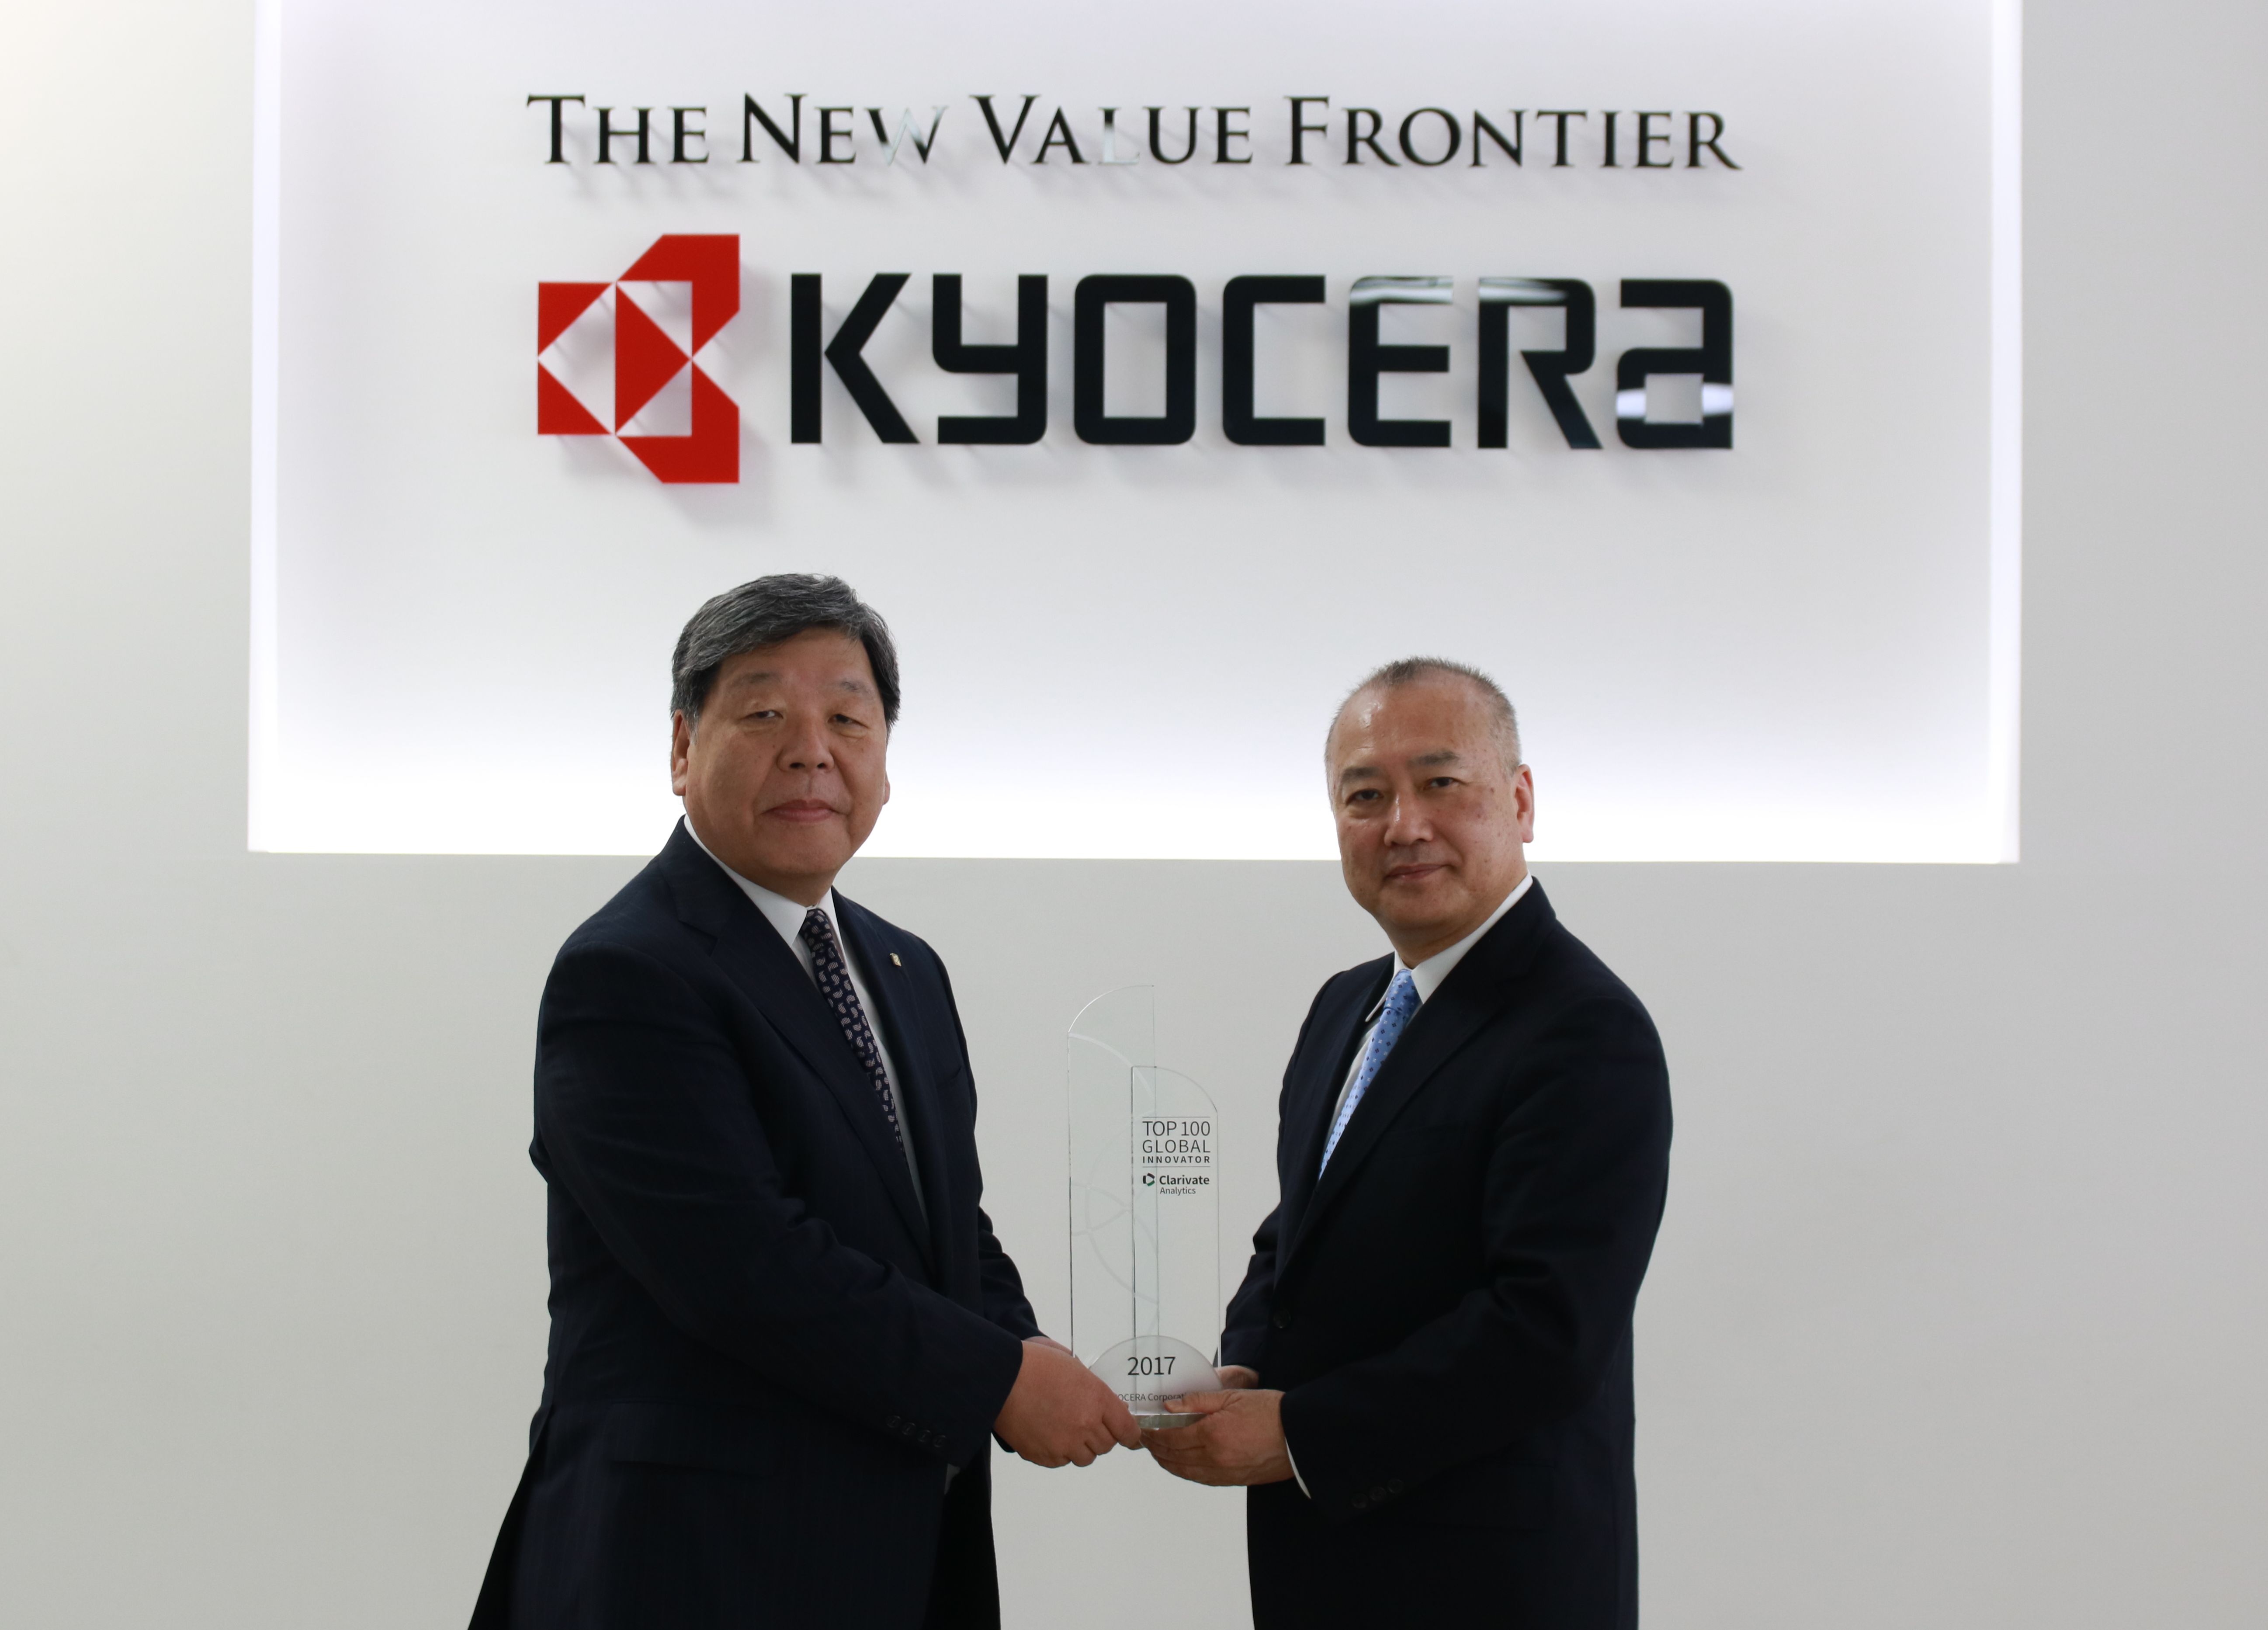 kyocera_named_among_top_100_global_innovators_by_clarivate_analytics.-cps-32211-image.cpsarticle.jpg